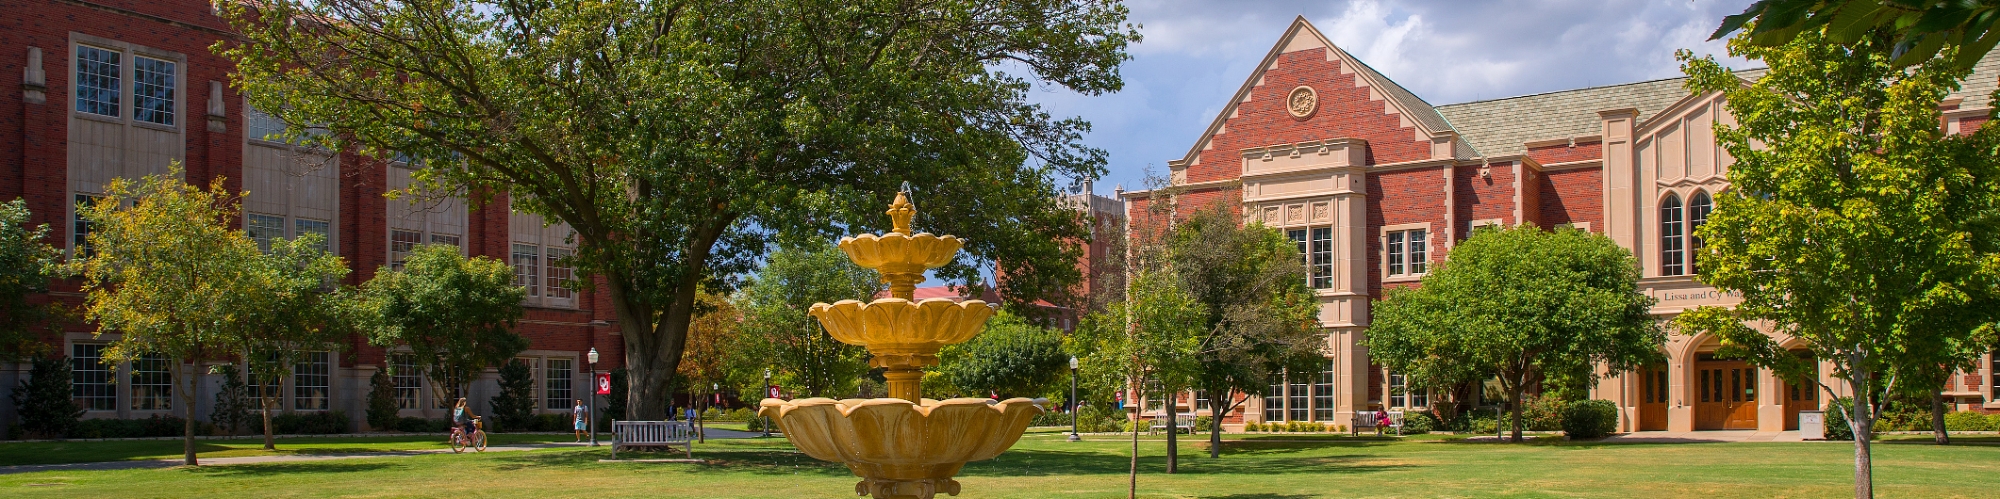 Image of Wagner Hall with fountain in front.